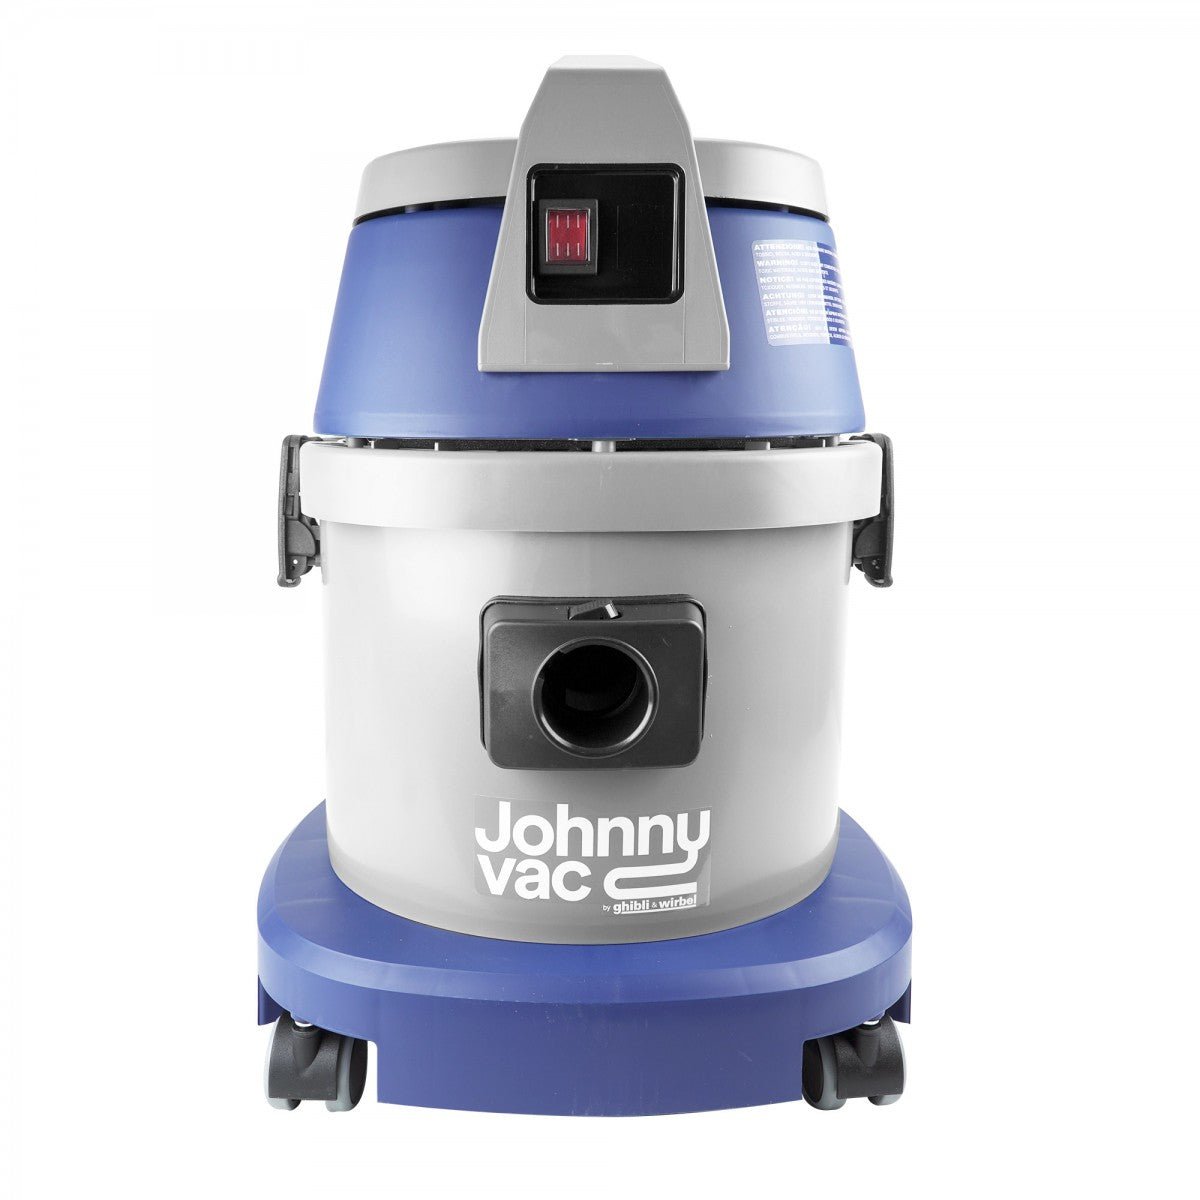 Ghibli/Johnny Vac JV10/AS10 4 Gal Commercial Wet/Dry Canister Vacuum - Wet & Dry Vacuums